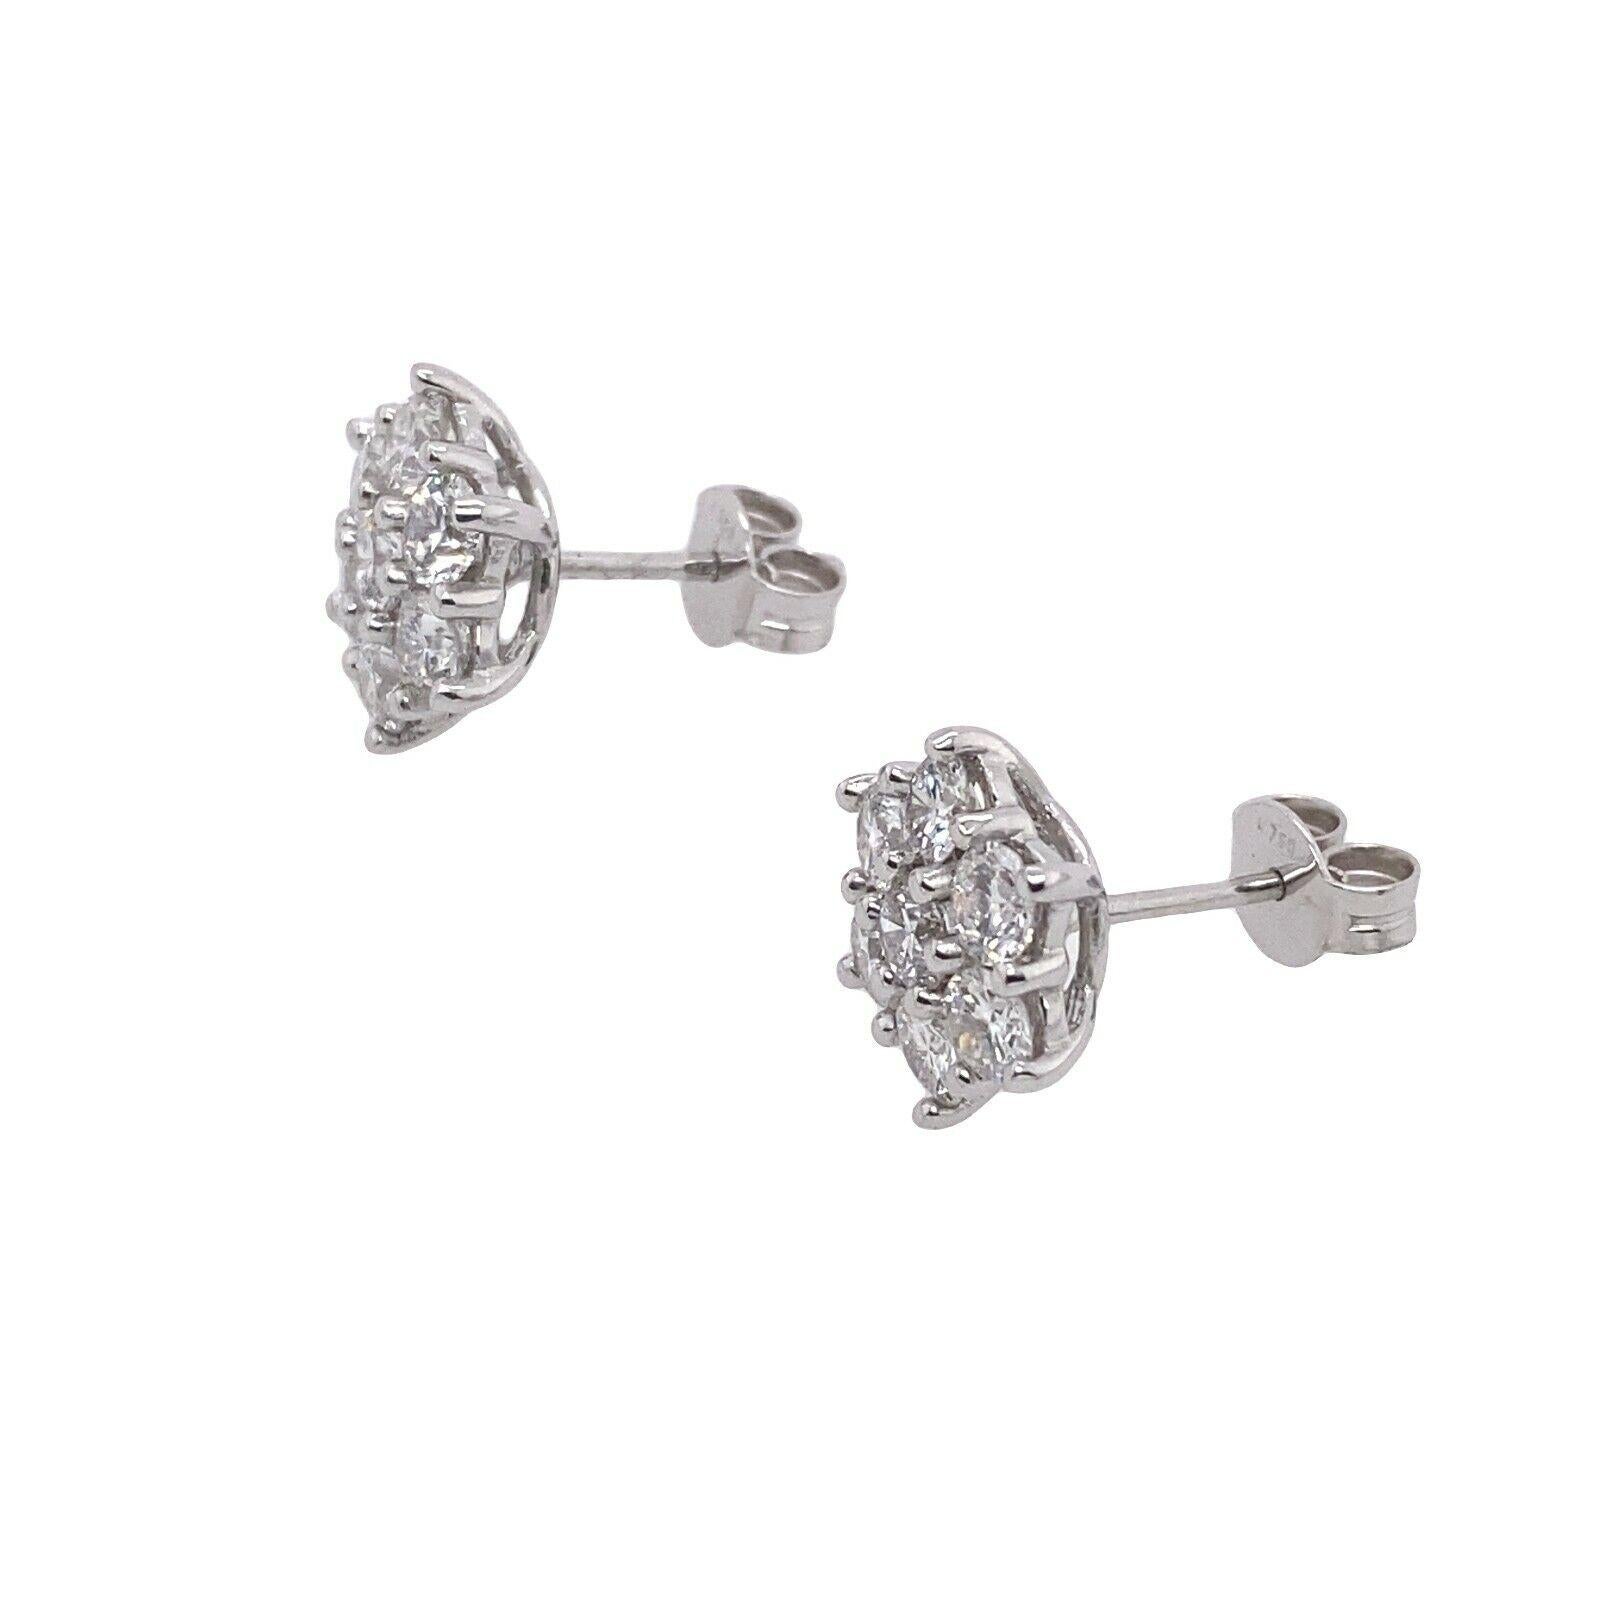 18ct White Gold Diamond Cluster Earrings Set with 1.50ct G VS of Total Diamonds with Peg & Butterfly Fittings.

Additional Information:
Total Diamond Weight: 1.50ct 
Diamond Colour: G
Diamond Clarity: VS
Total Weight: 3.8g
Earring Size: 10mm
SMS5371
